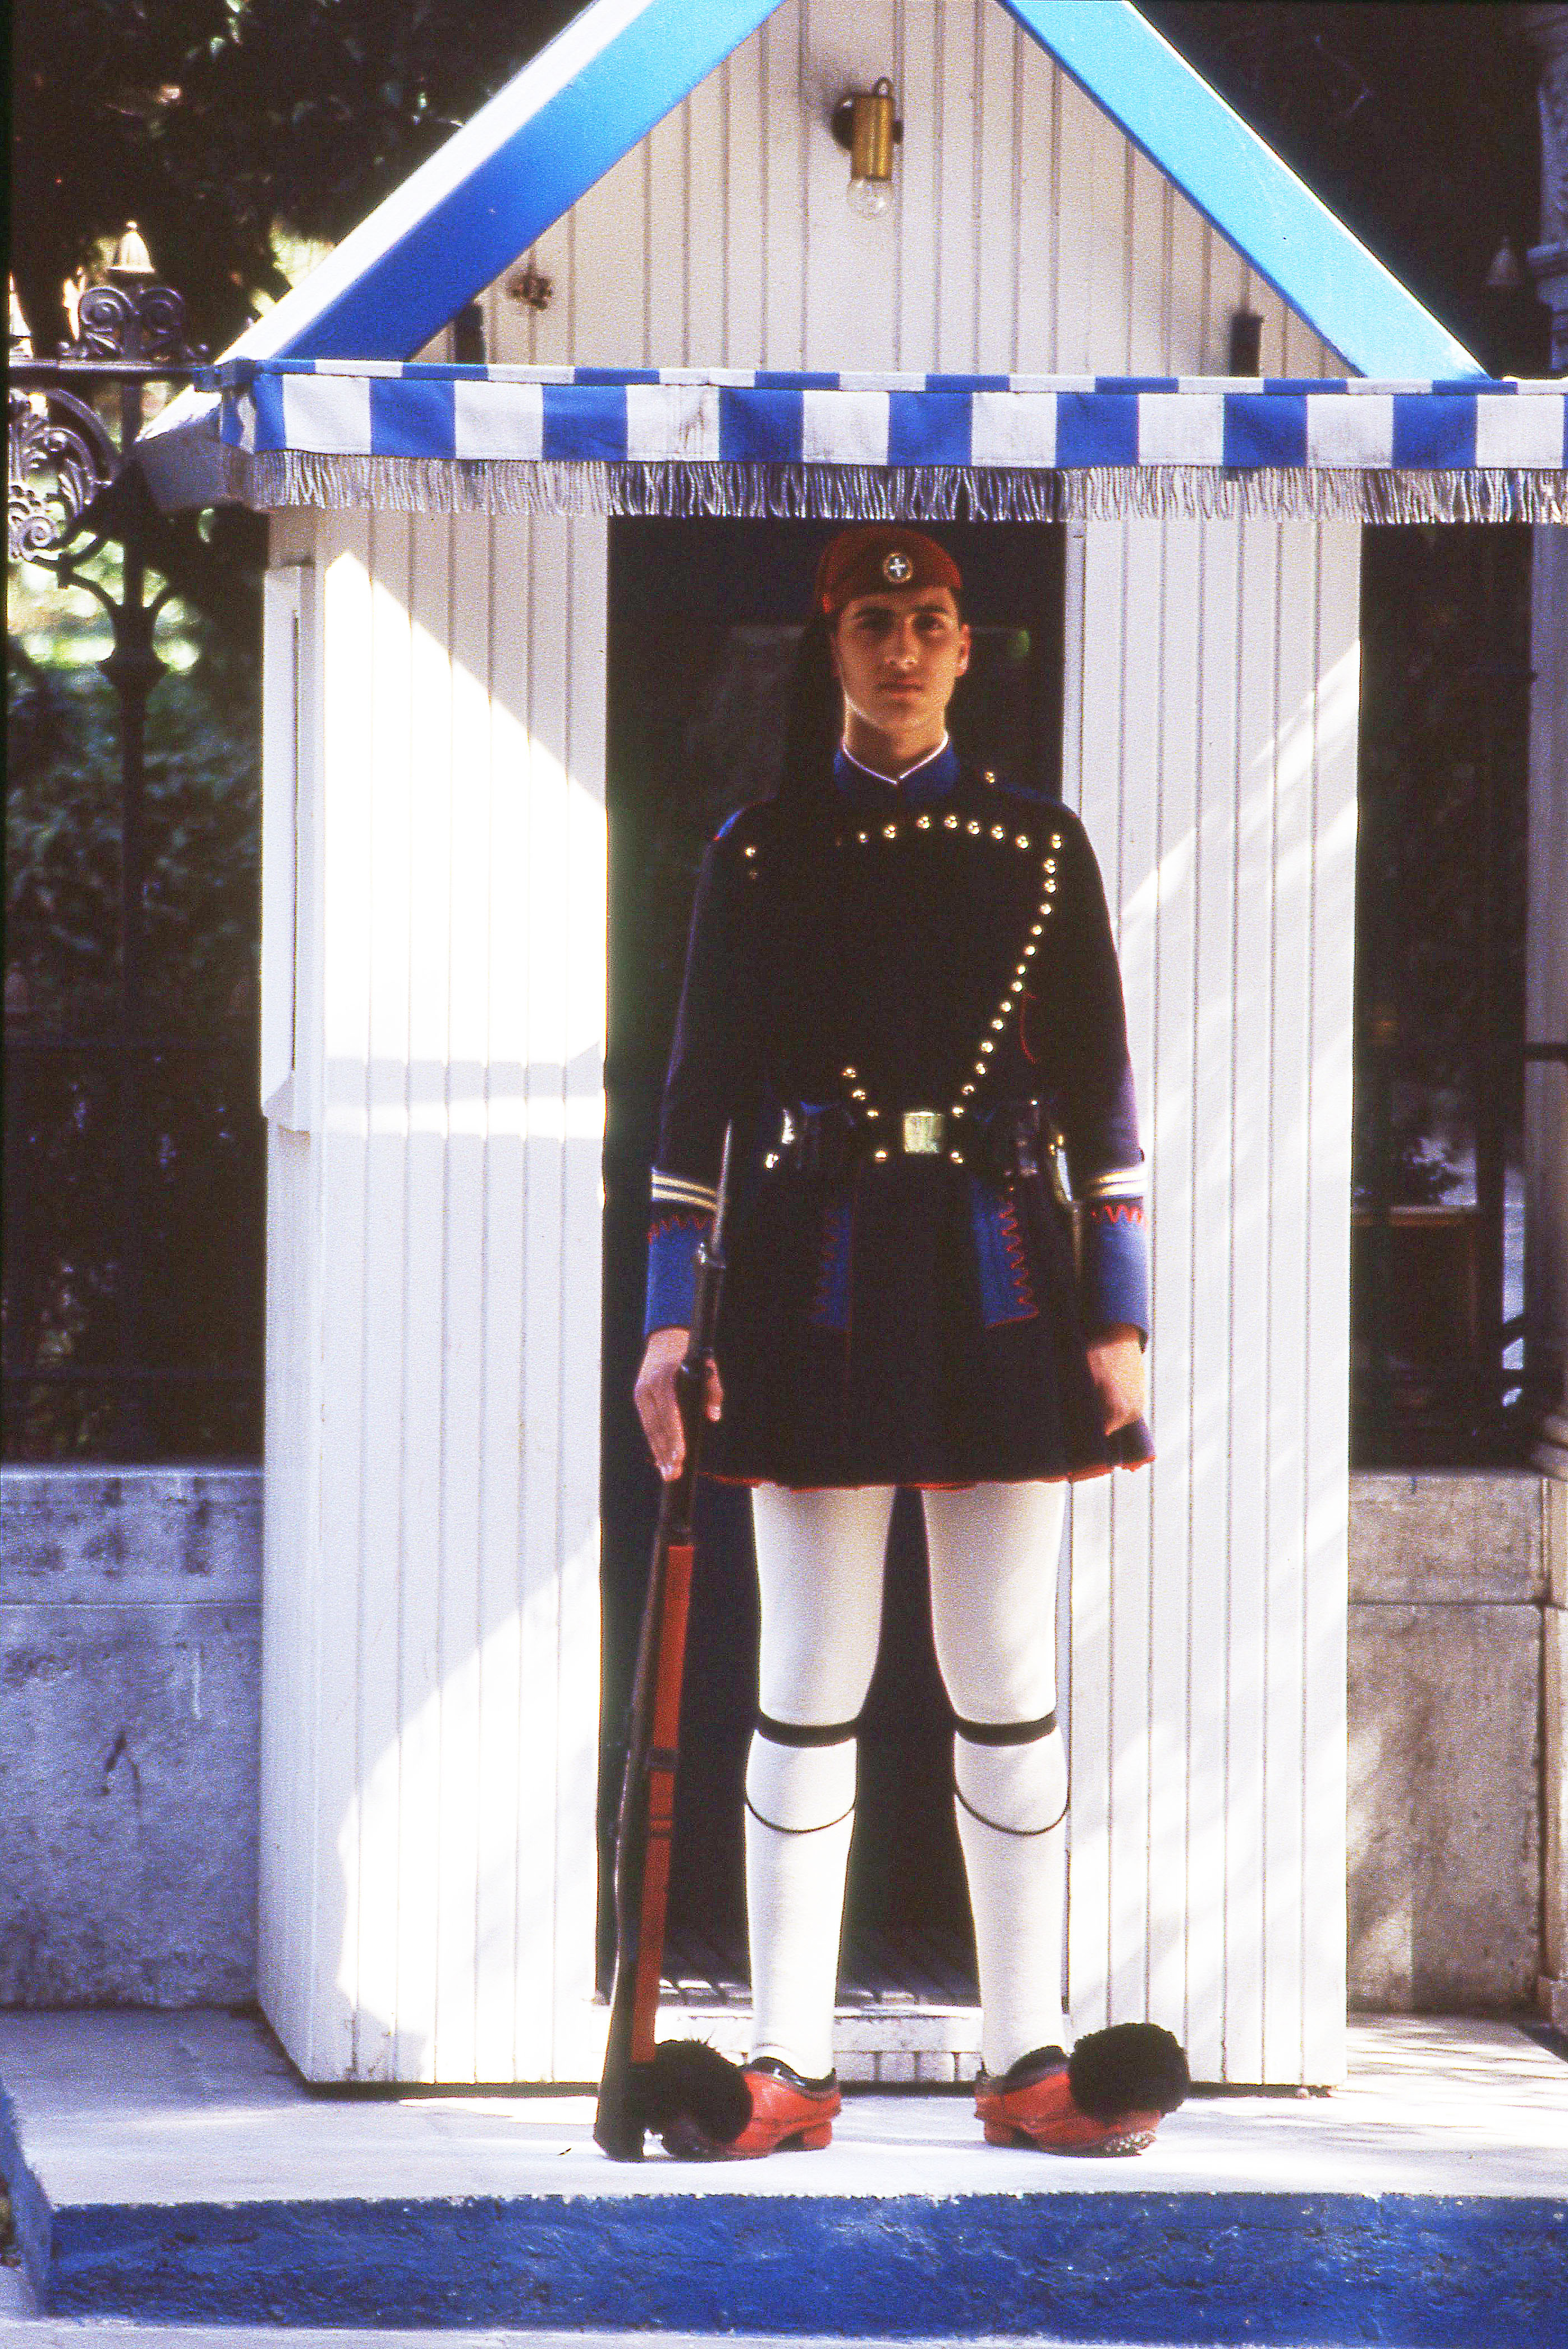 Greek soldier on Syntagma Square